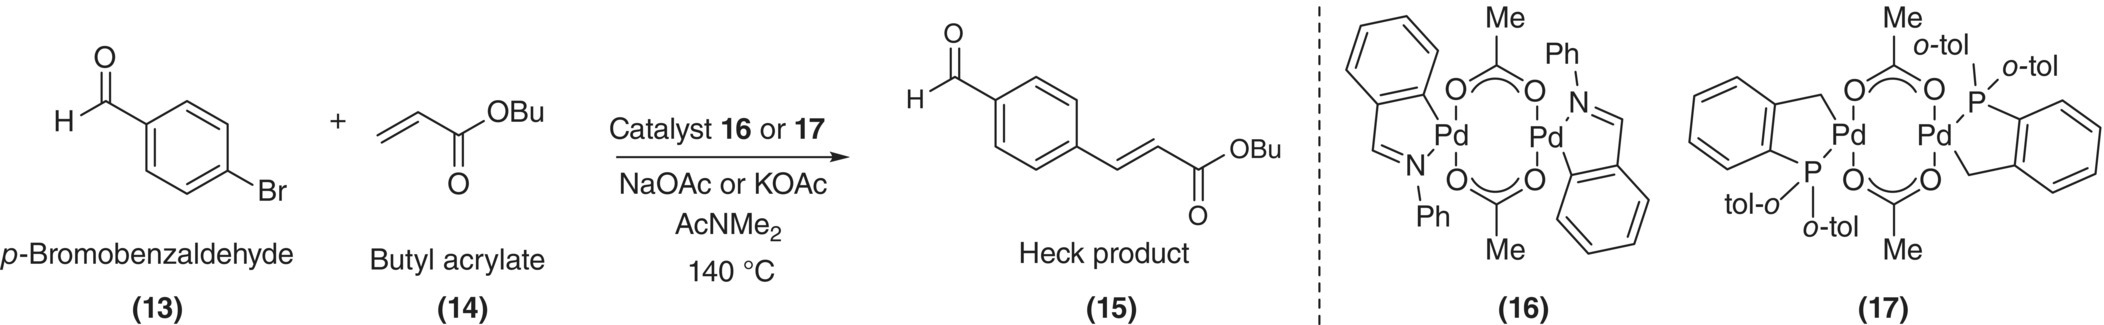 Reaction schematic starting from p-bromobenzaldehyde (13) and butyl acrylate (14) leading to a Heck product (15) involving catalyst 16 or 17, NaOAC or KOAc, AcNMe2. Skeletal formulas of catalysts 16 and 17 are at the right.